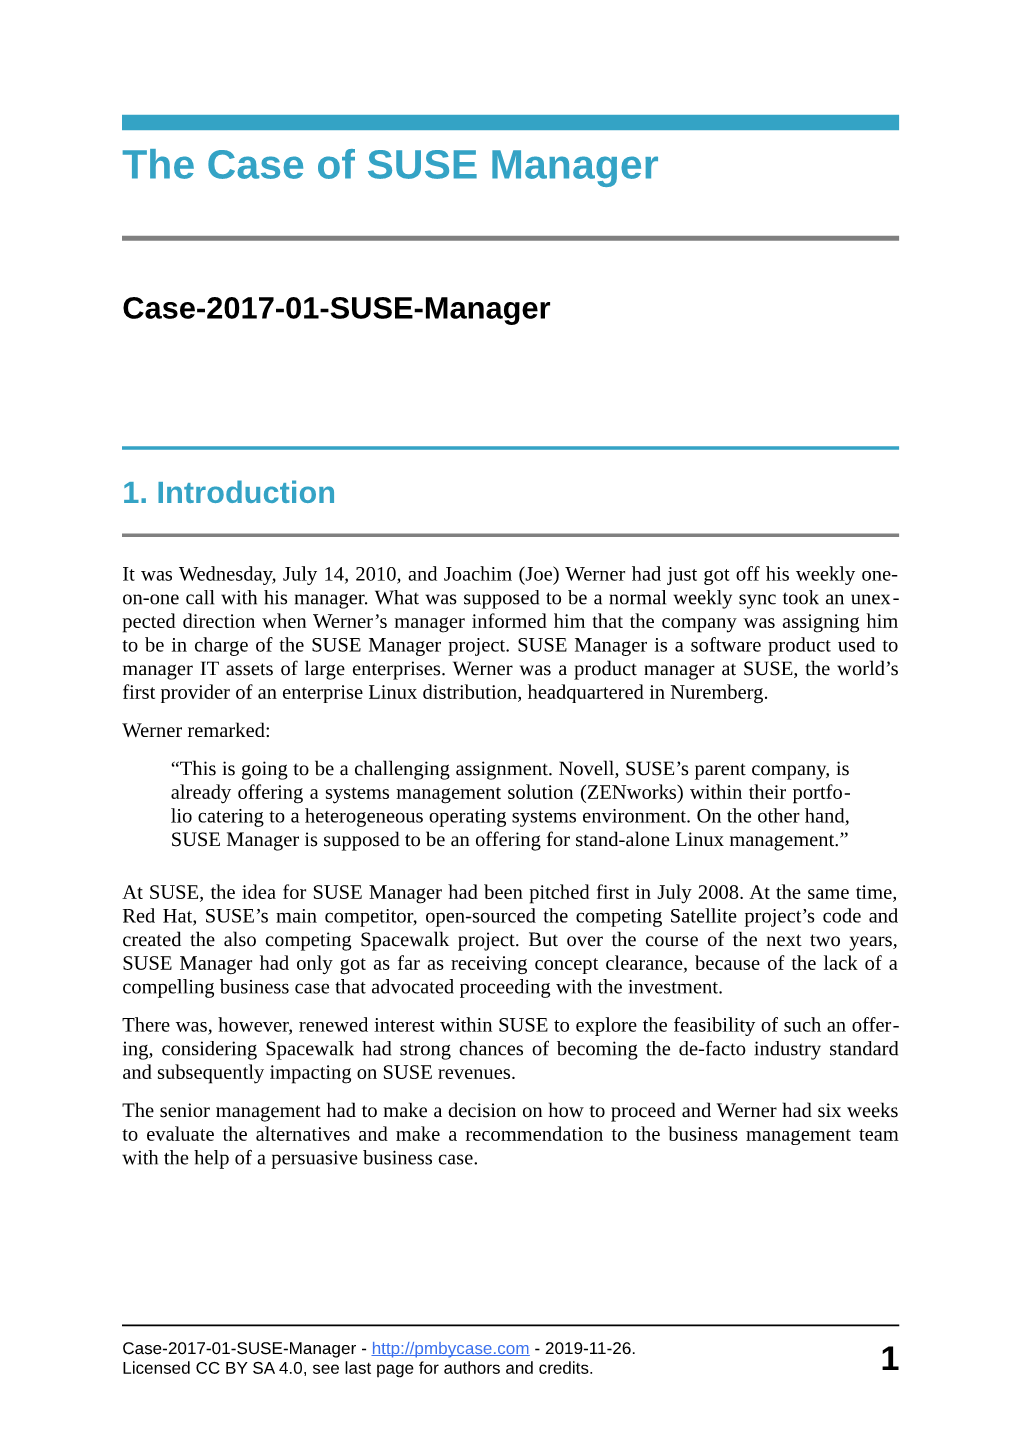 The Case of SUSE Manager